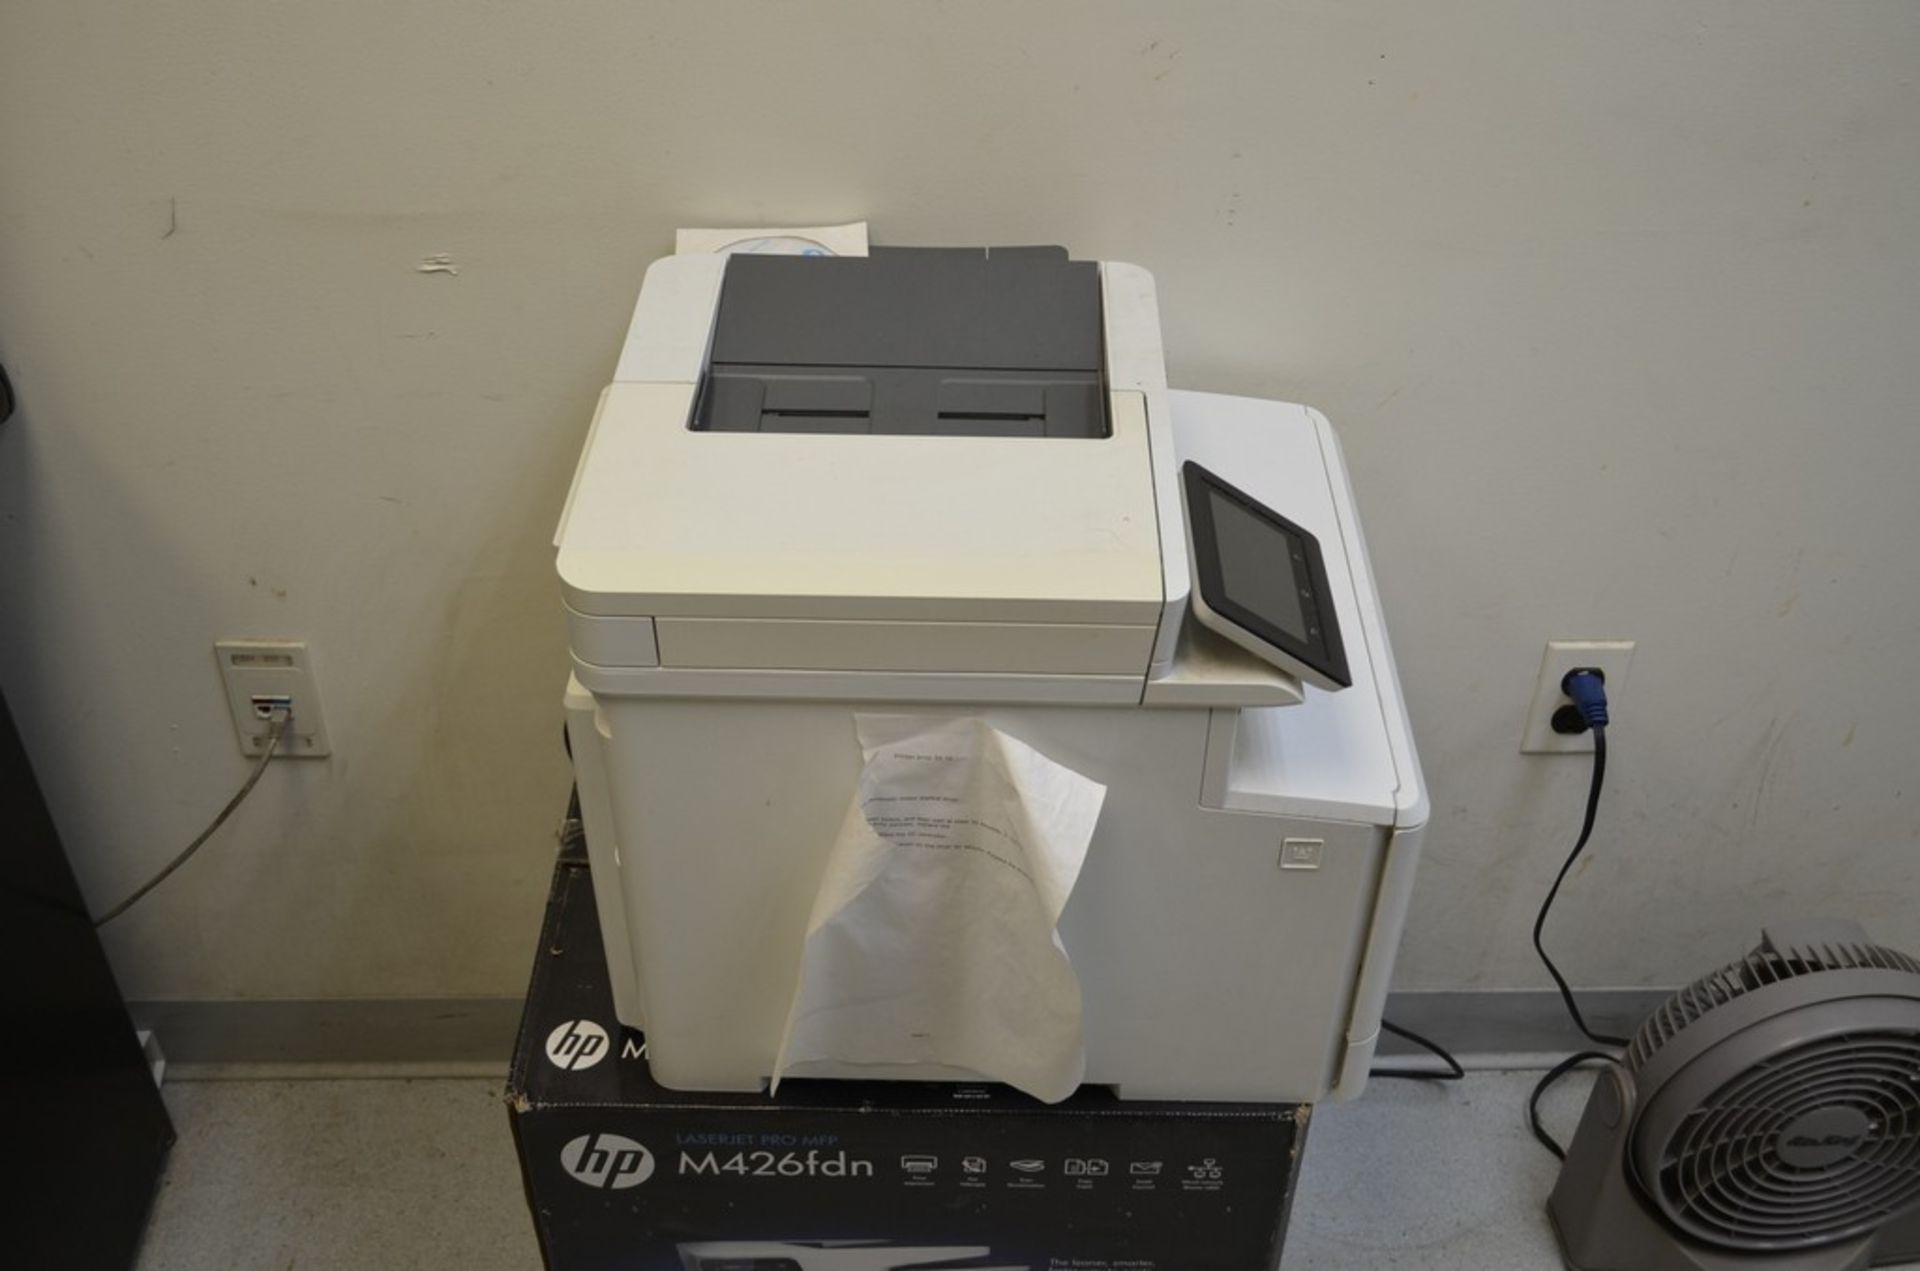 Lot - HP LaserJet Pro MFP477 fdn Printer and Furniture; Location in Plant: 2nd Floor Shipping/ - Image 2 of 6